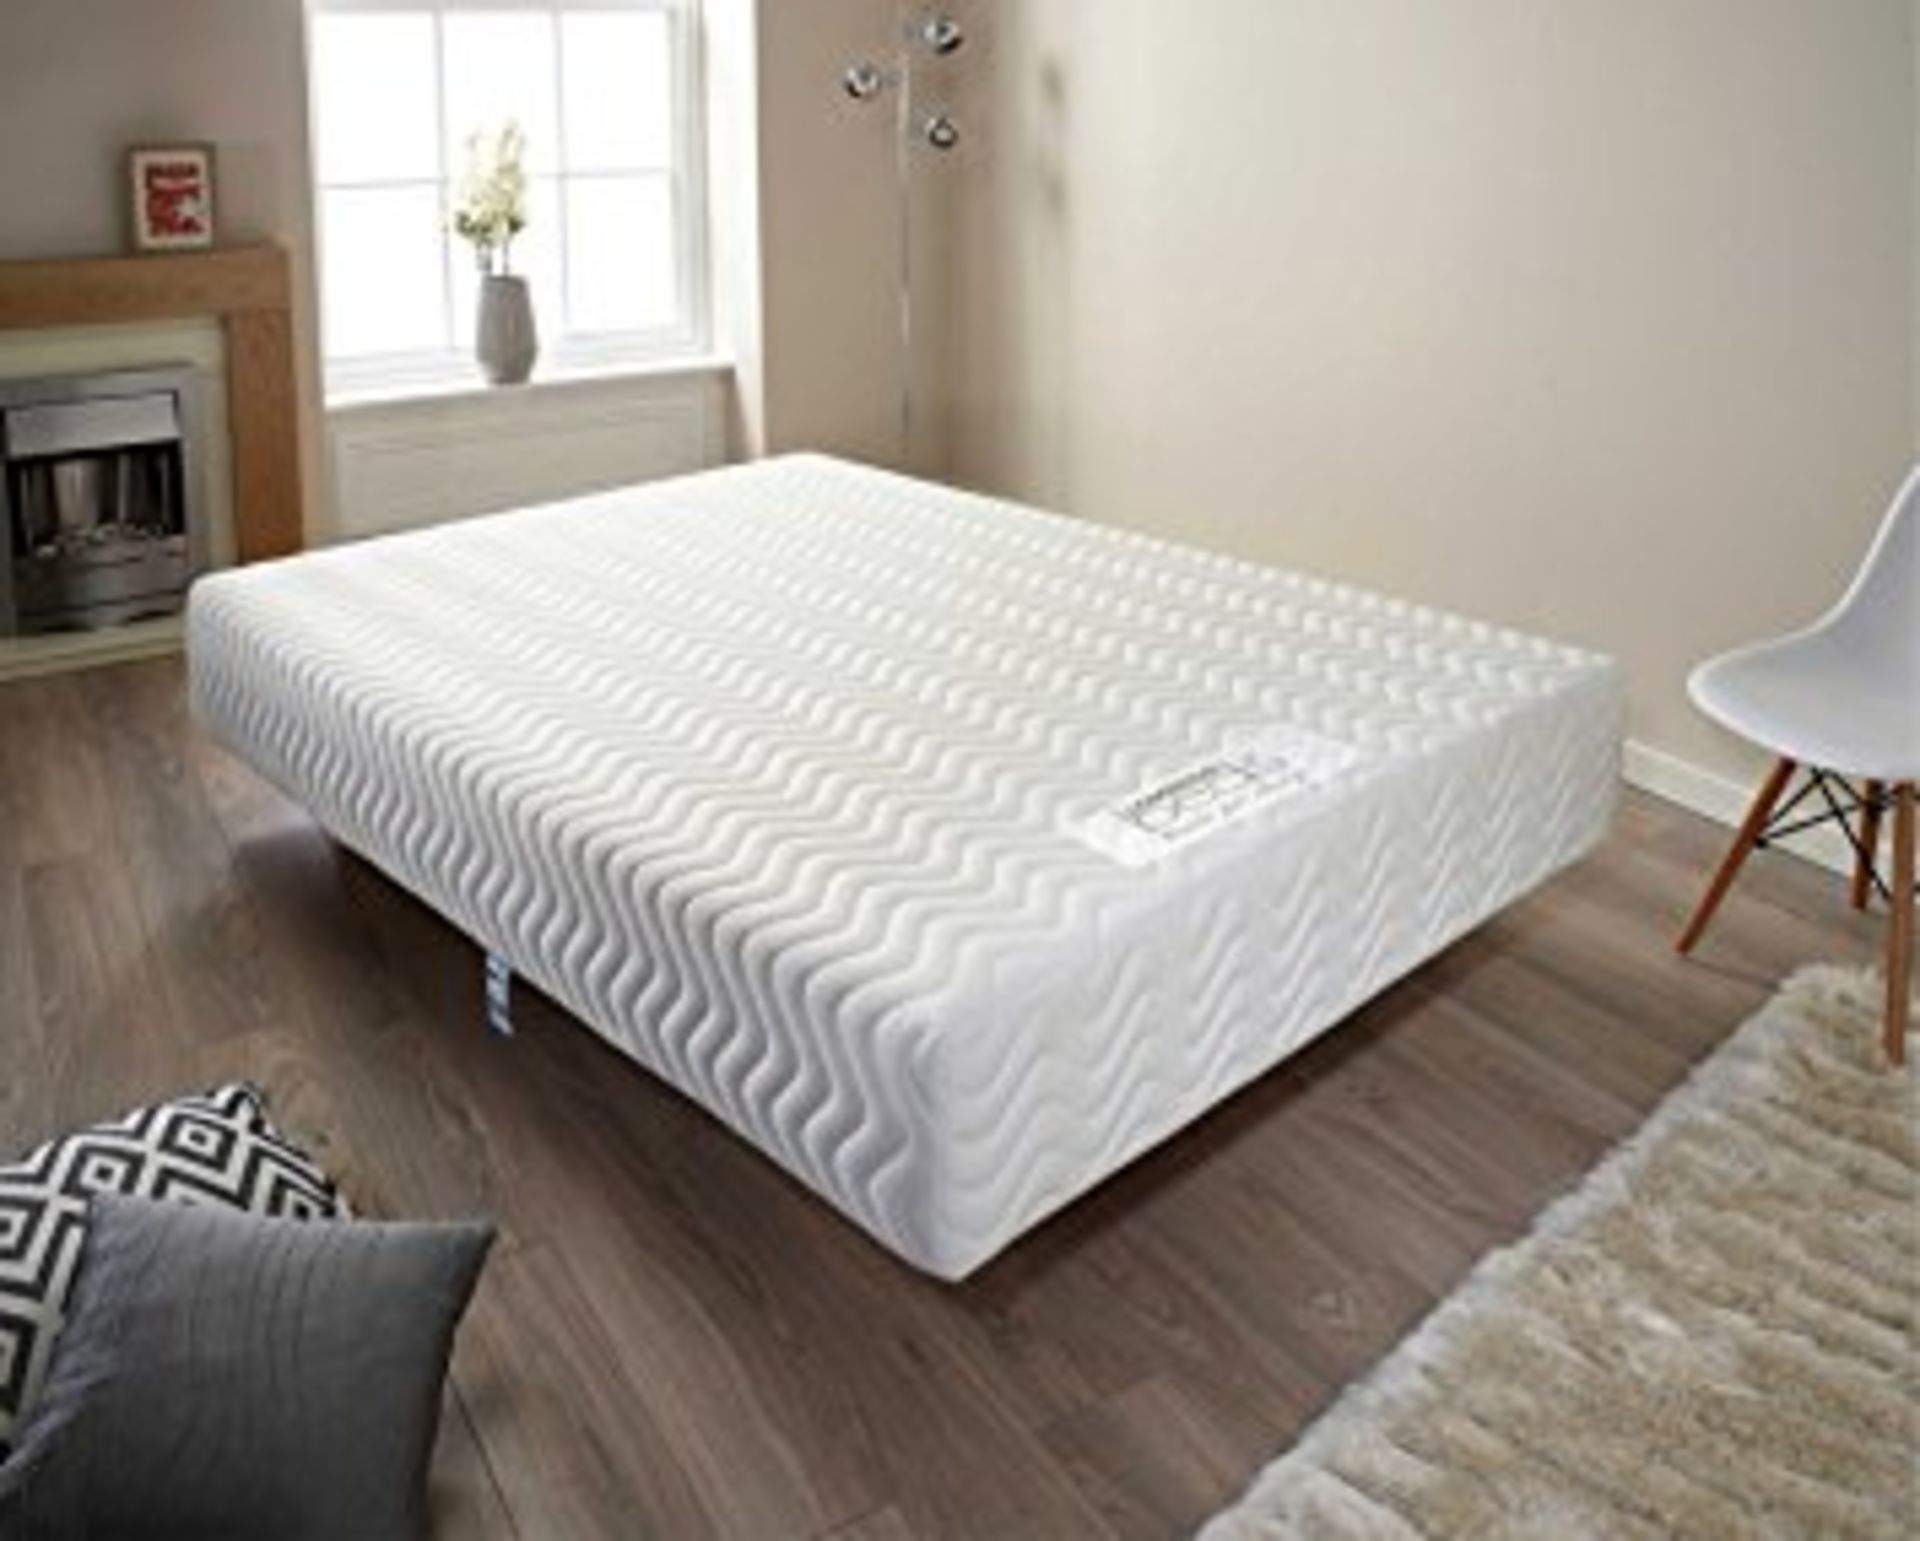 1 BRAND NEW BAGGED, ROLLED AND BOXED CASPIAN 4FT 6" DOUBLE MEMORY FOAM MATTRESS 15CM THICKNESS